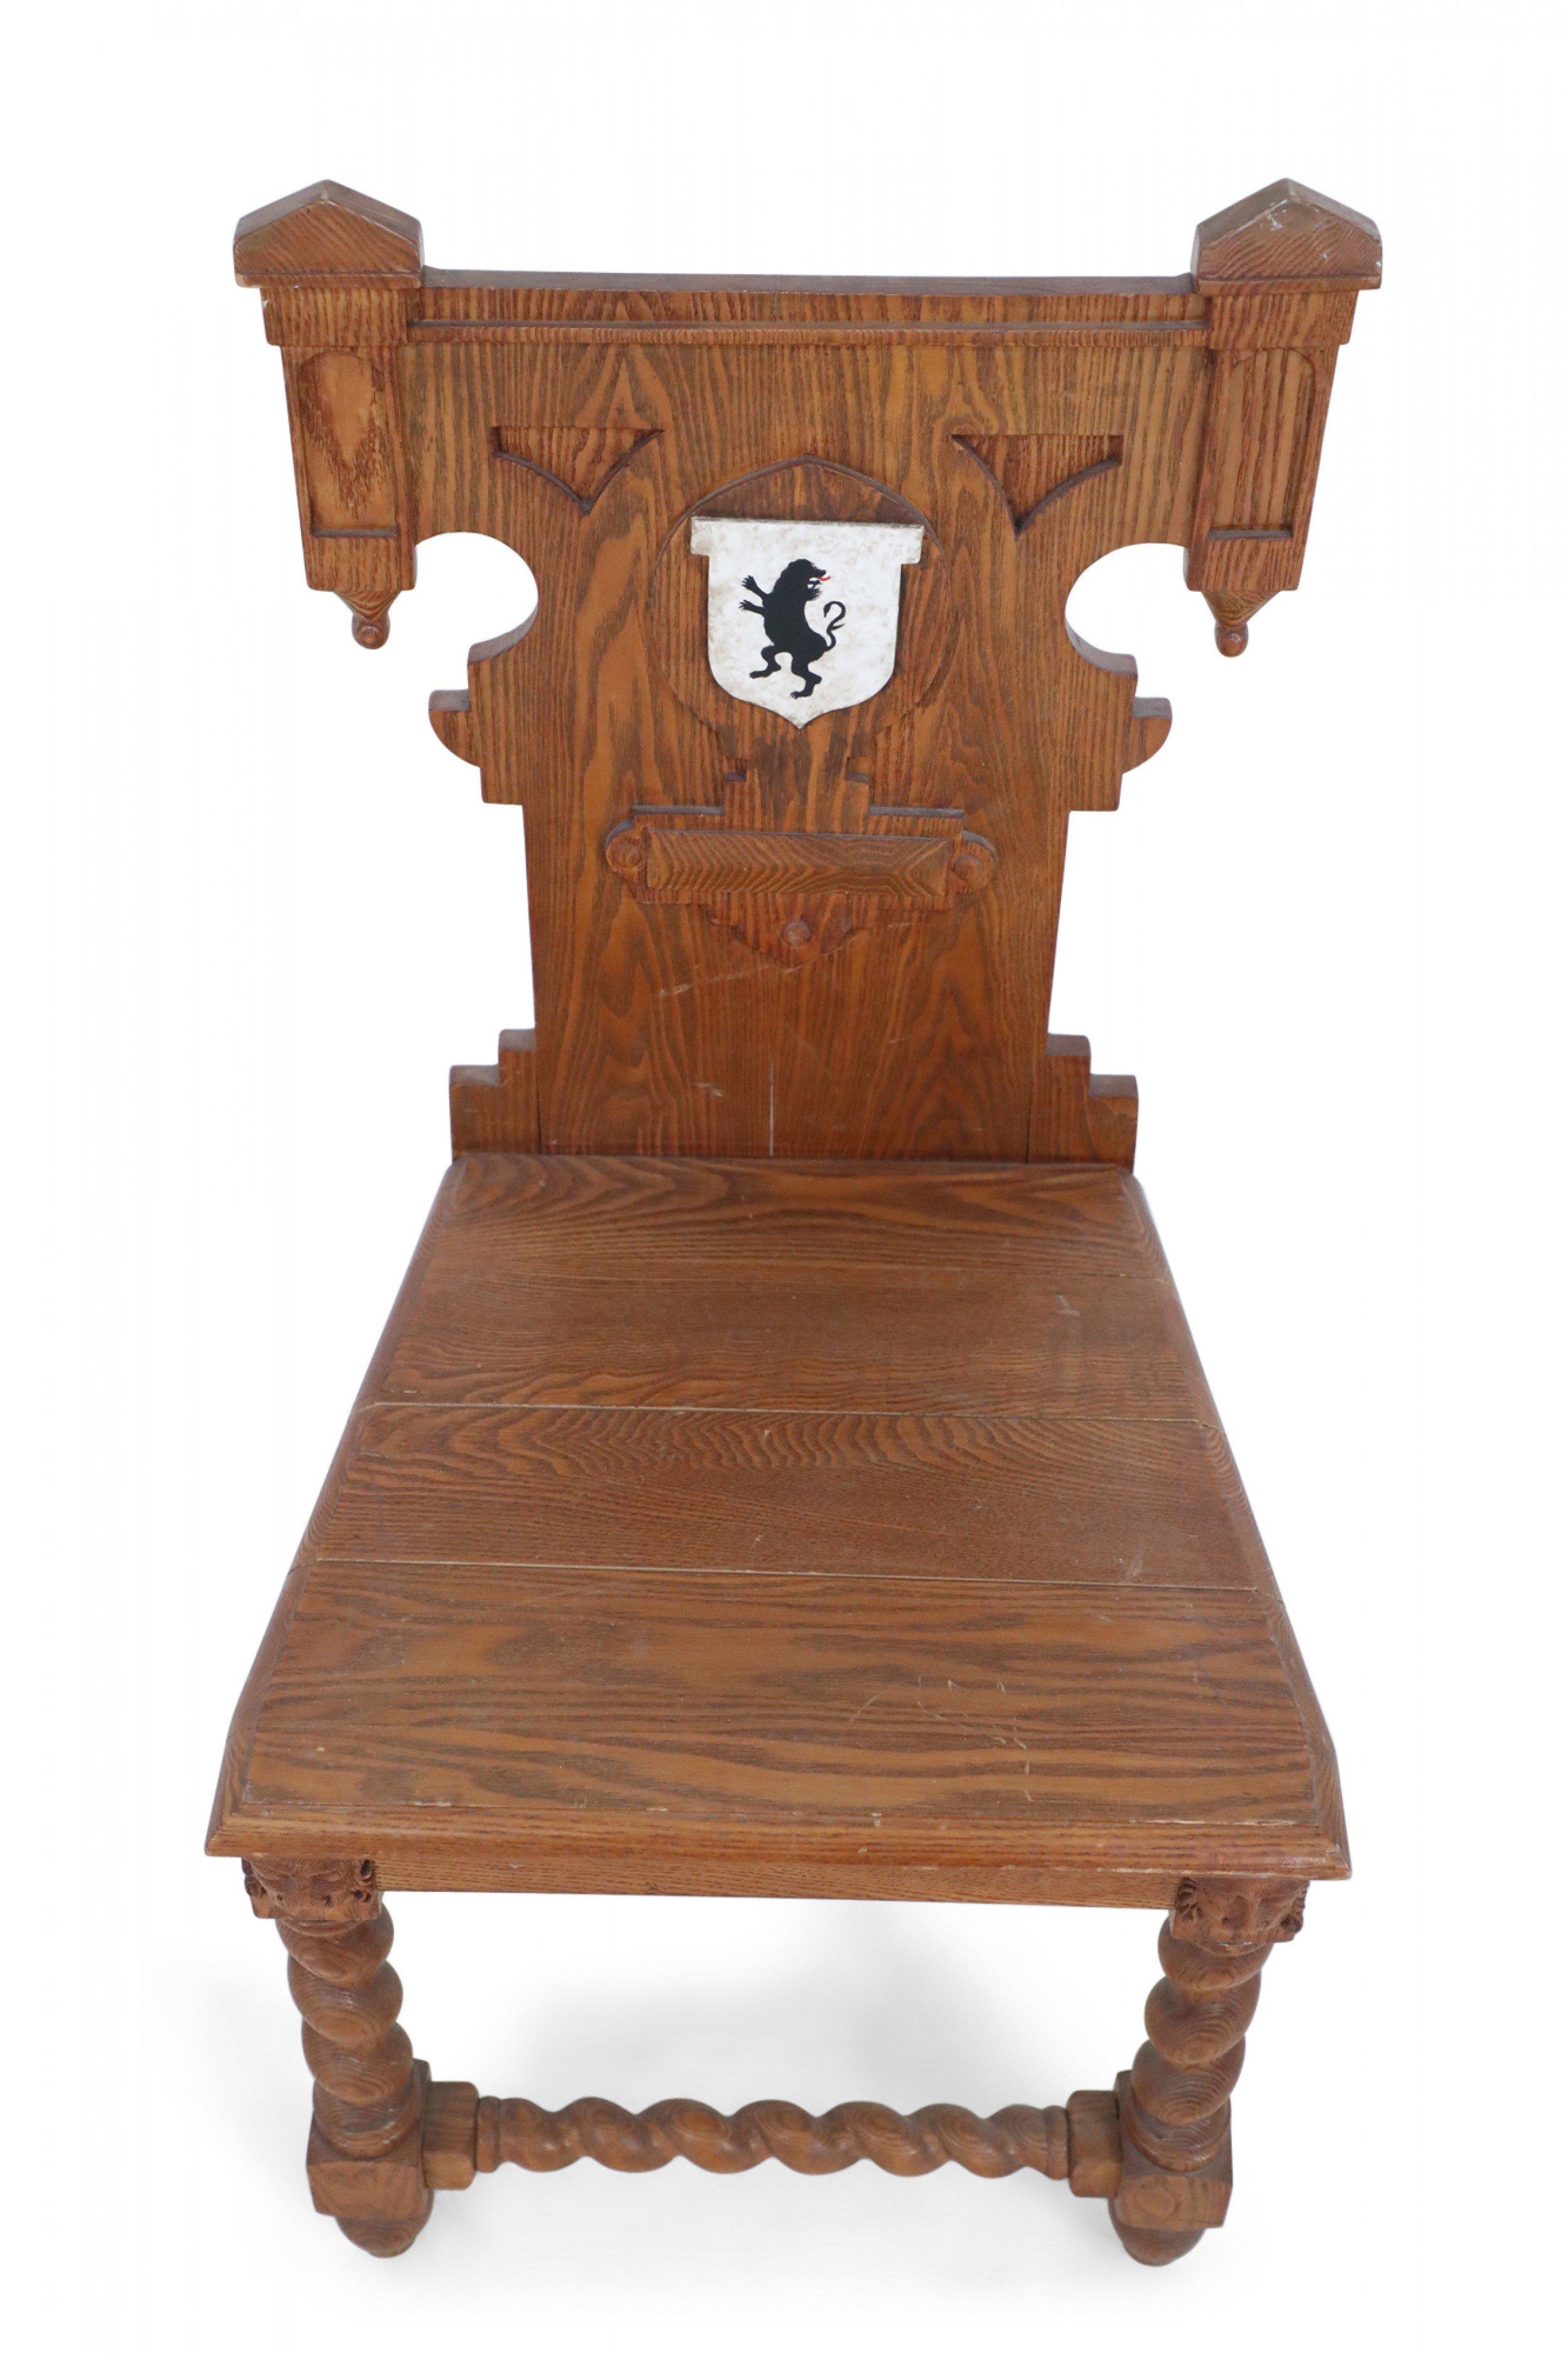 Italian Renaissance Carved Wooden Turn-Legged Side Chair For Sale 11